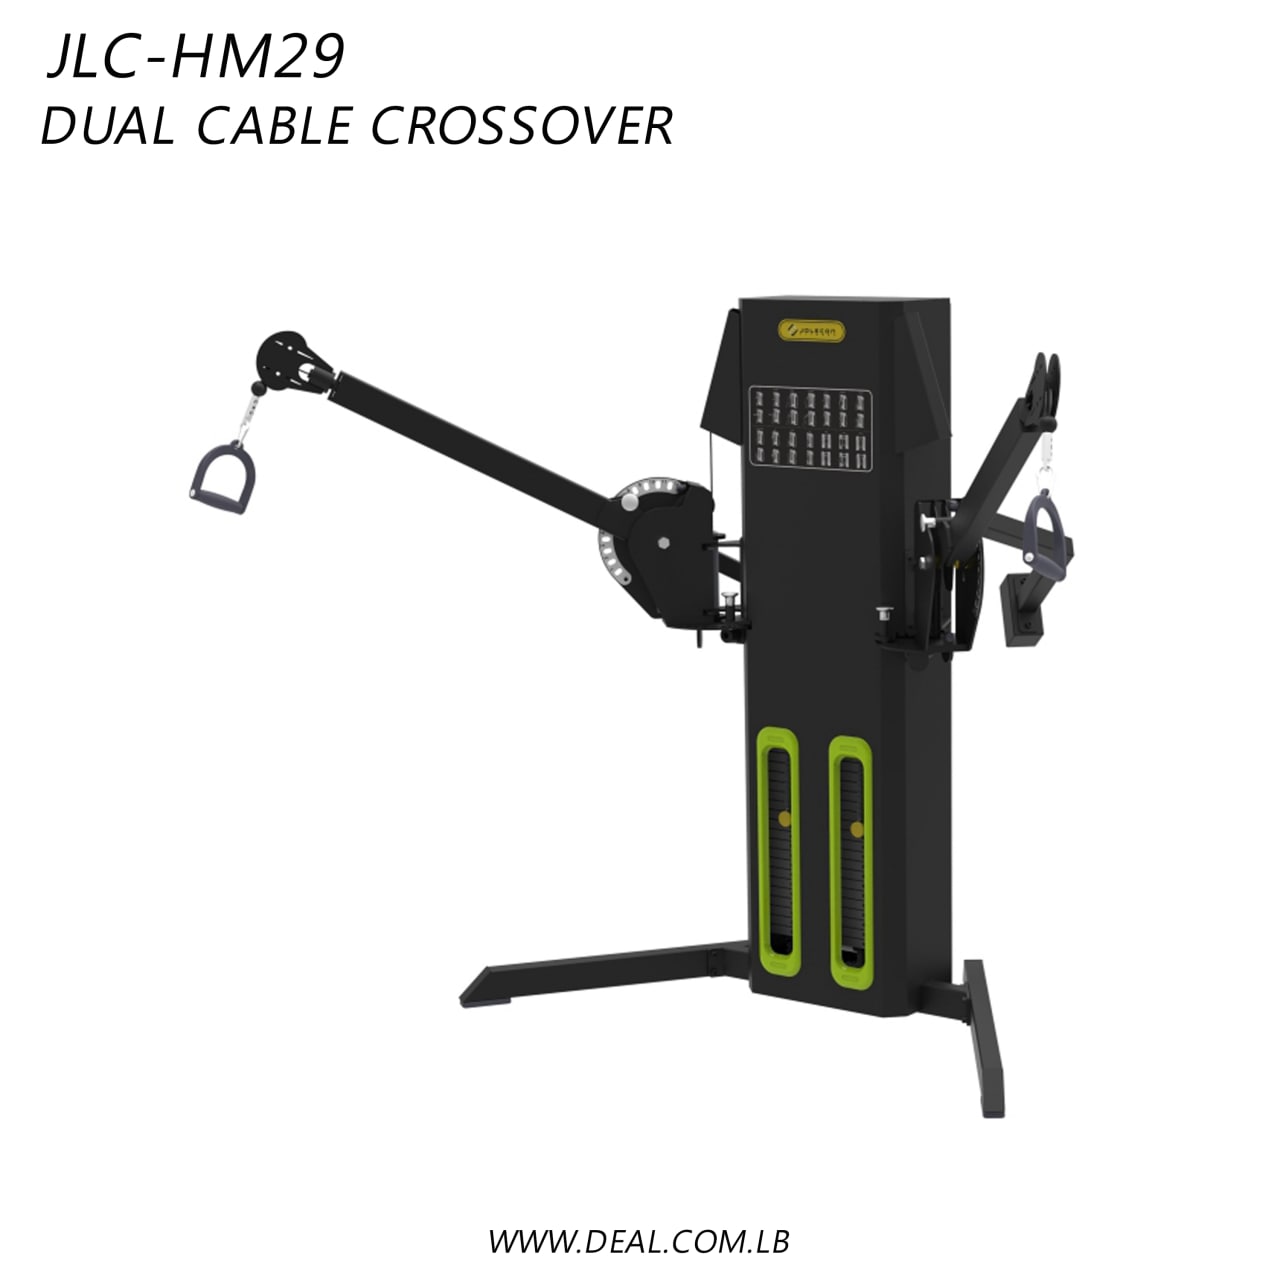 JLC-HM29 | Dual Cable Crossover